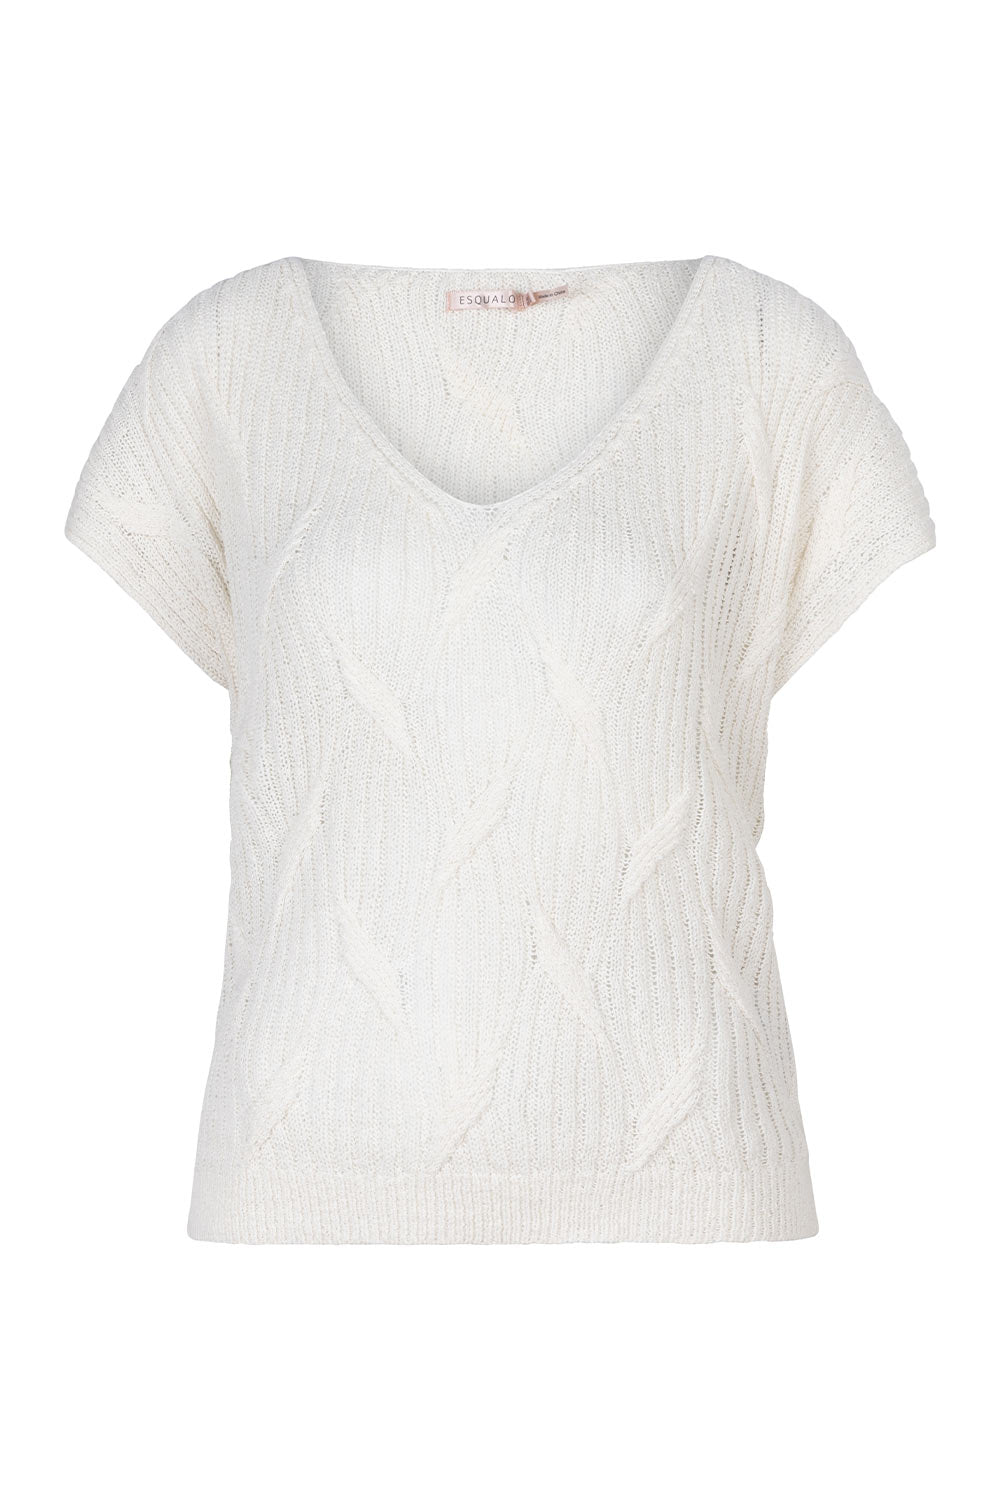 Esqualo (SP2427006) Short Sleeve Batwing V-Neck Sweater T-Shirt in Off White